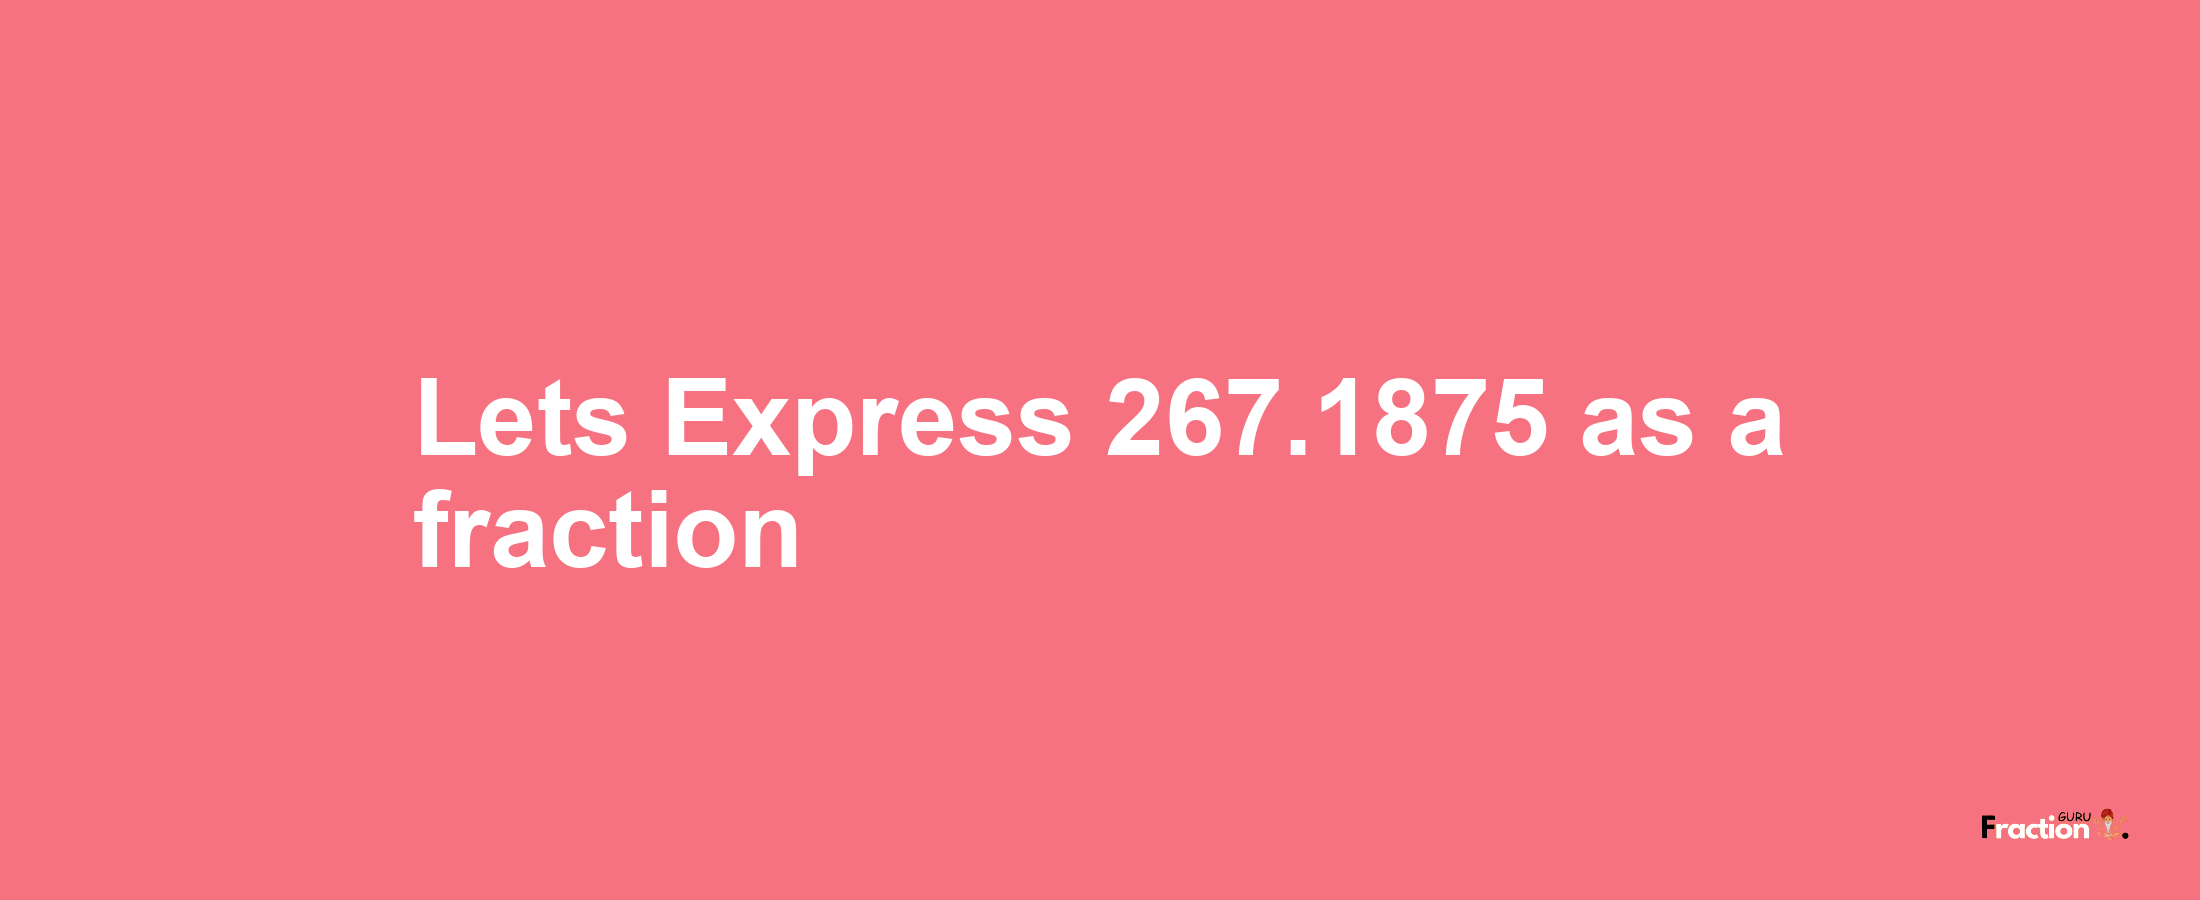 Lets Express 267.1875 as afraction